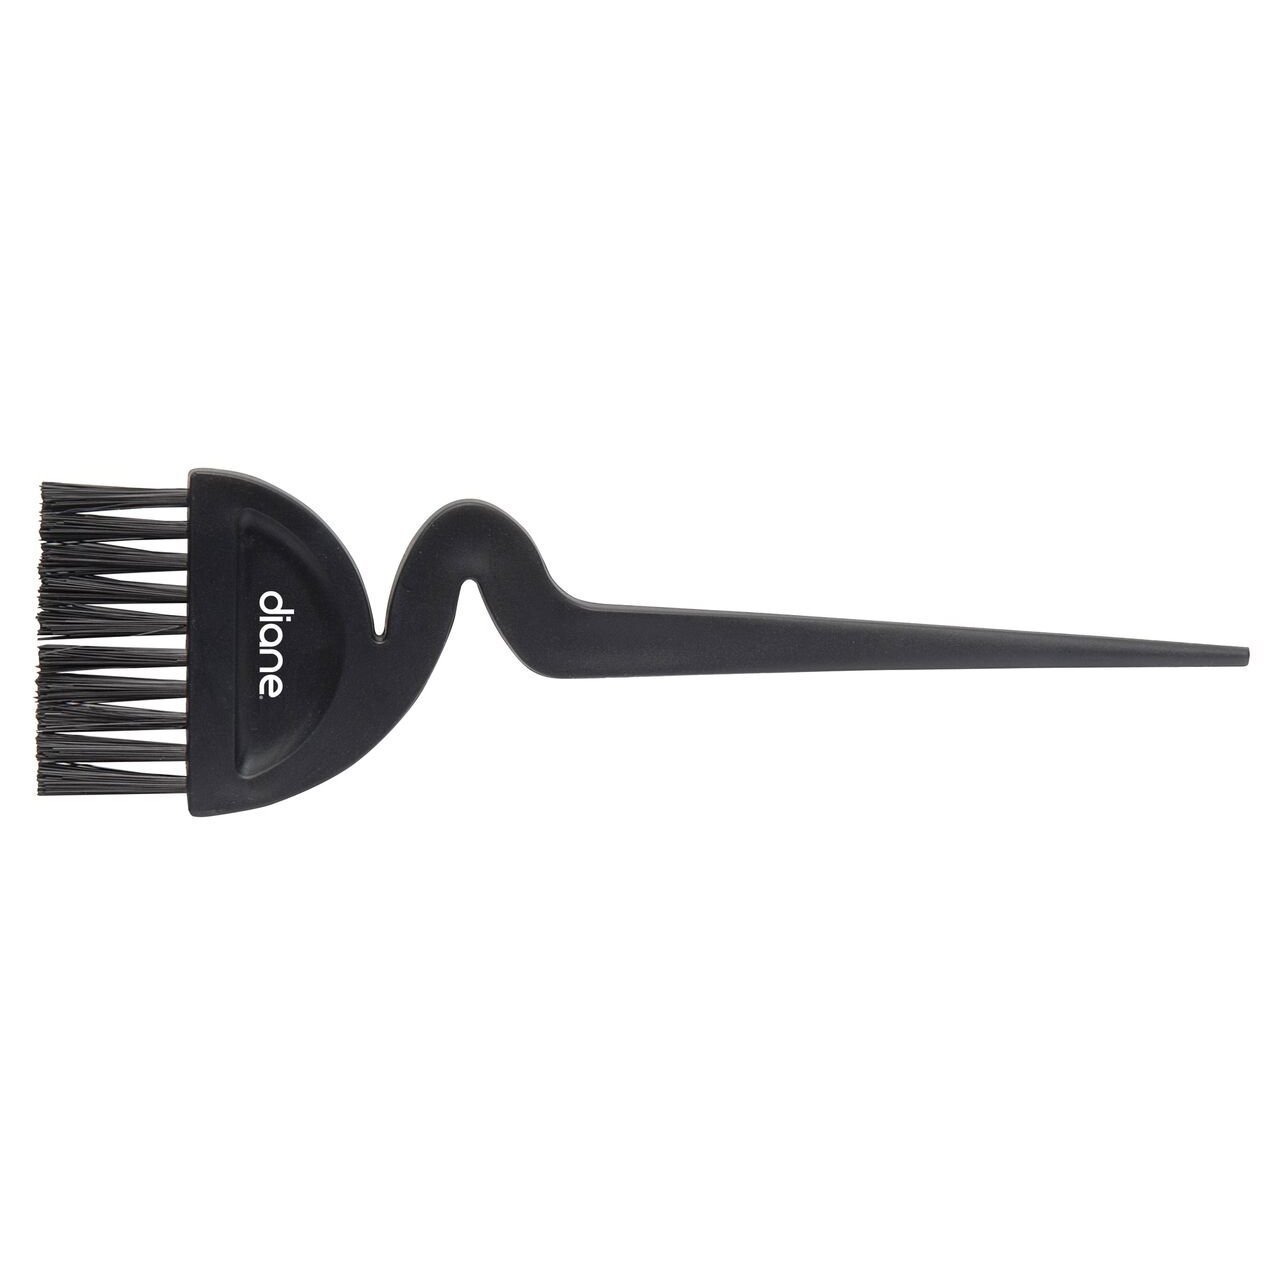 2 Inch Hook Tint Hair Color Brush | DAA015 HAIR COLORING ACCESSORIES DIANE 